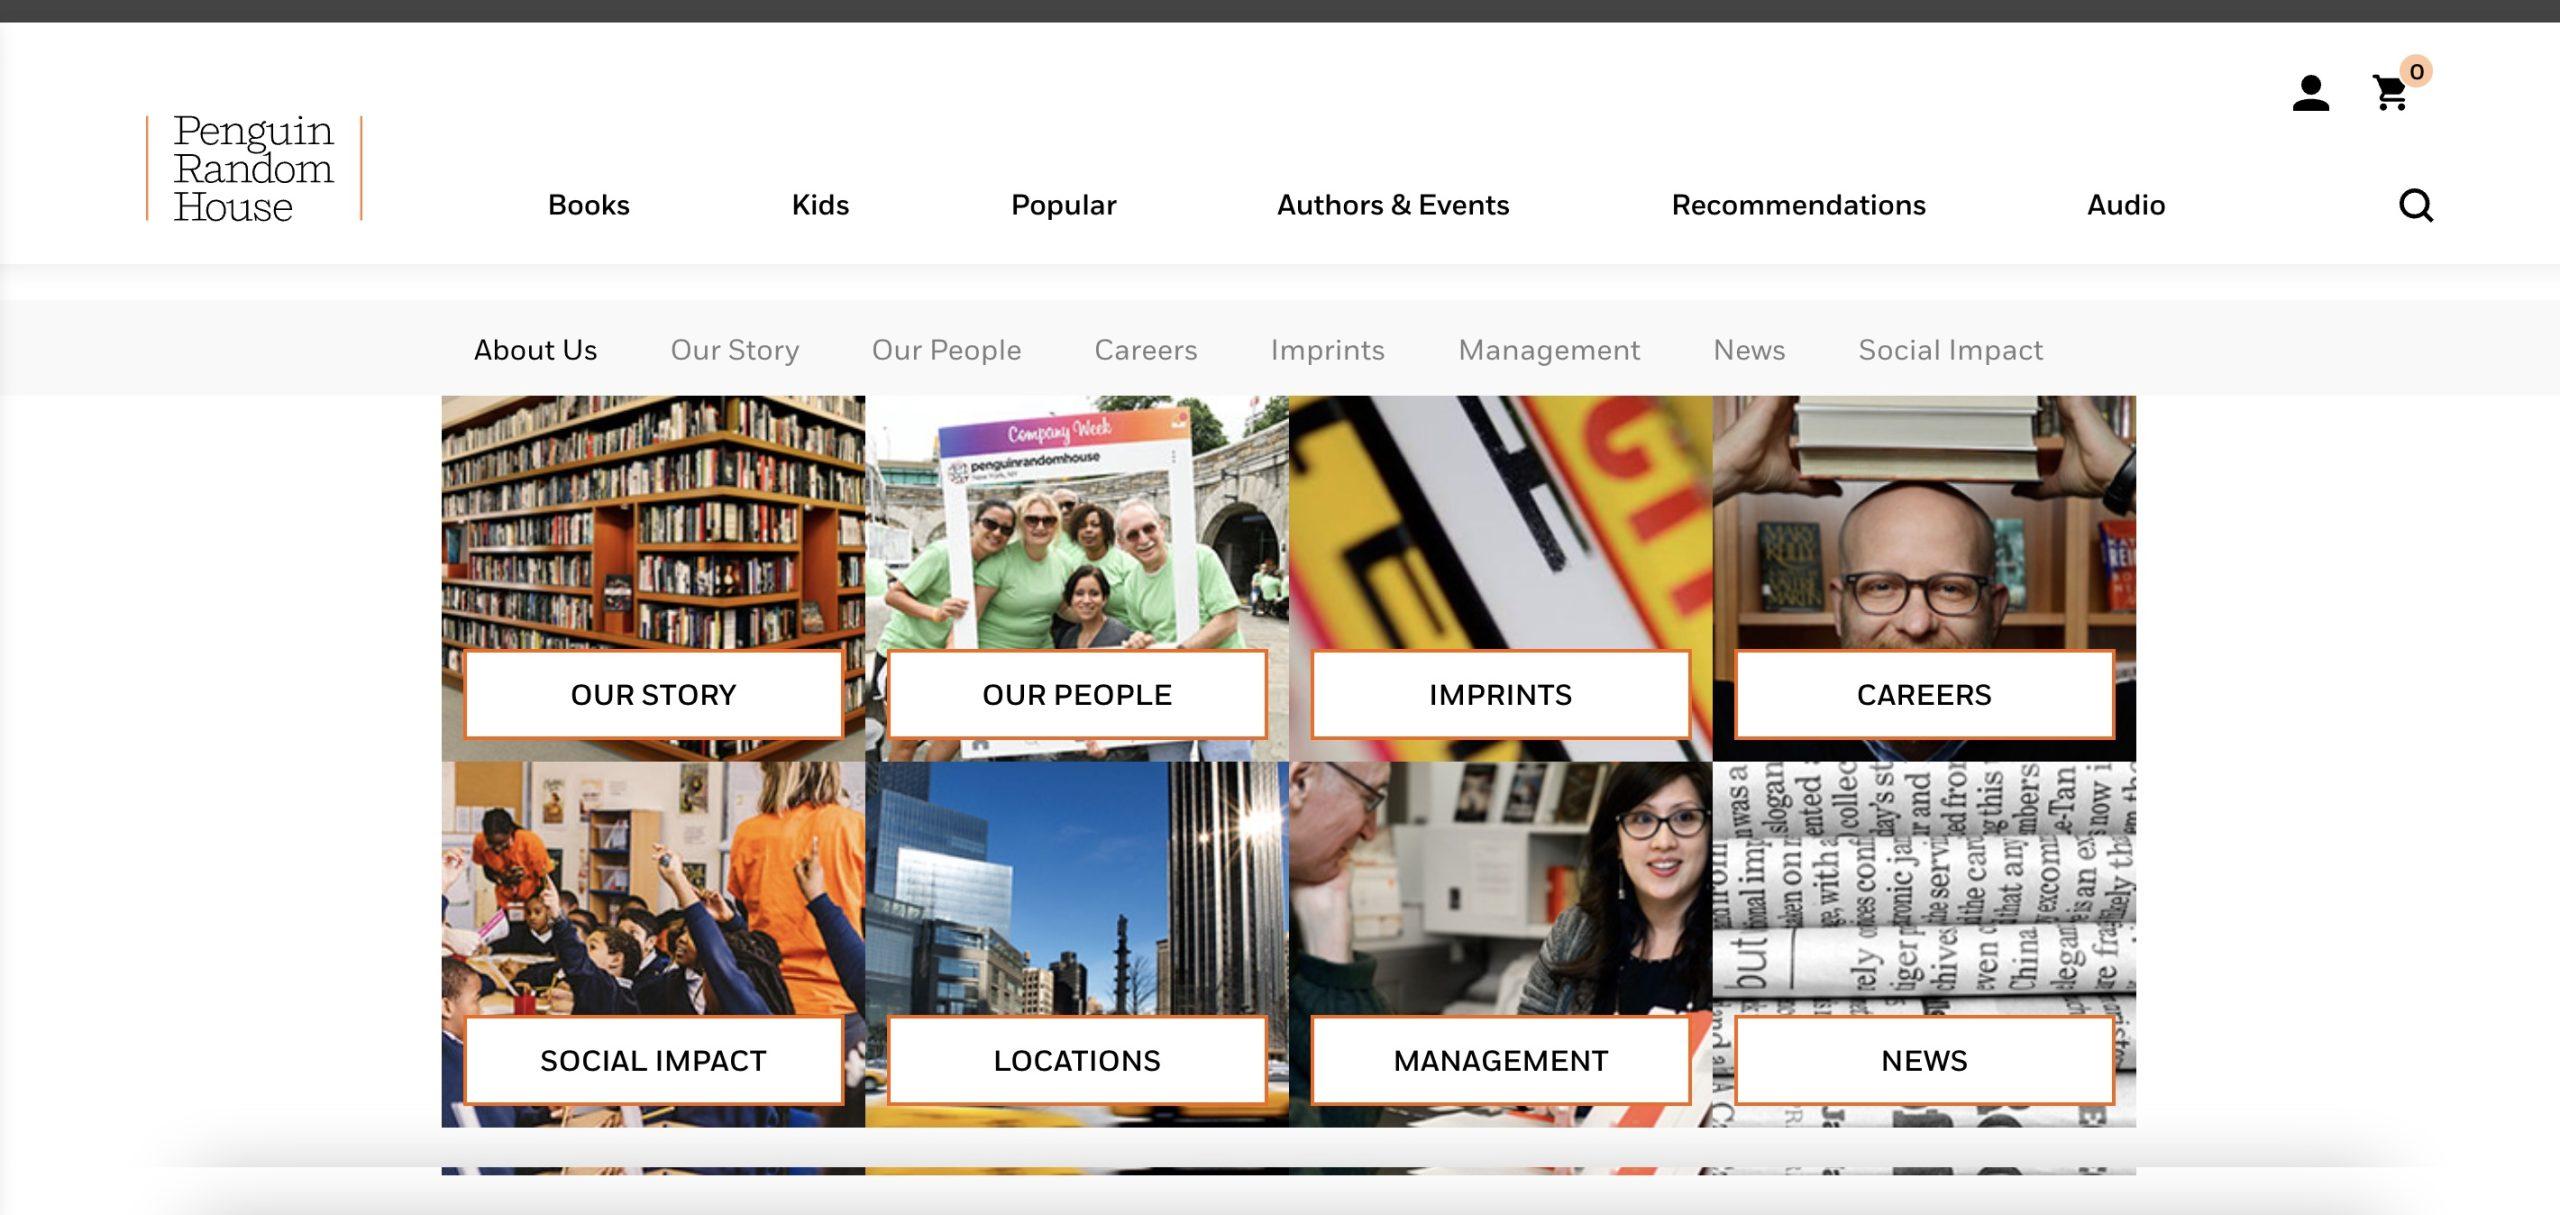 Penguin Random House about us page layout and design